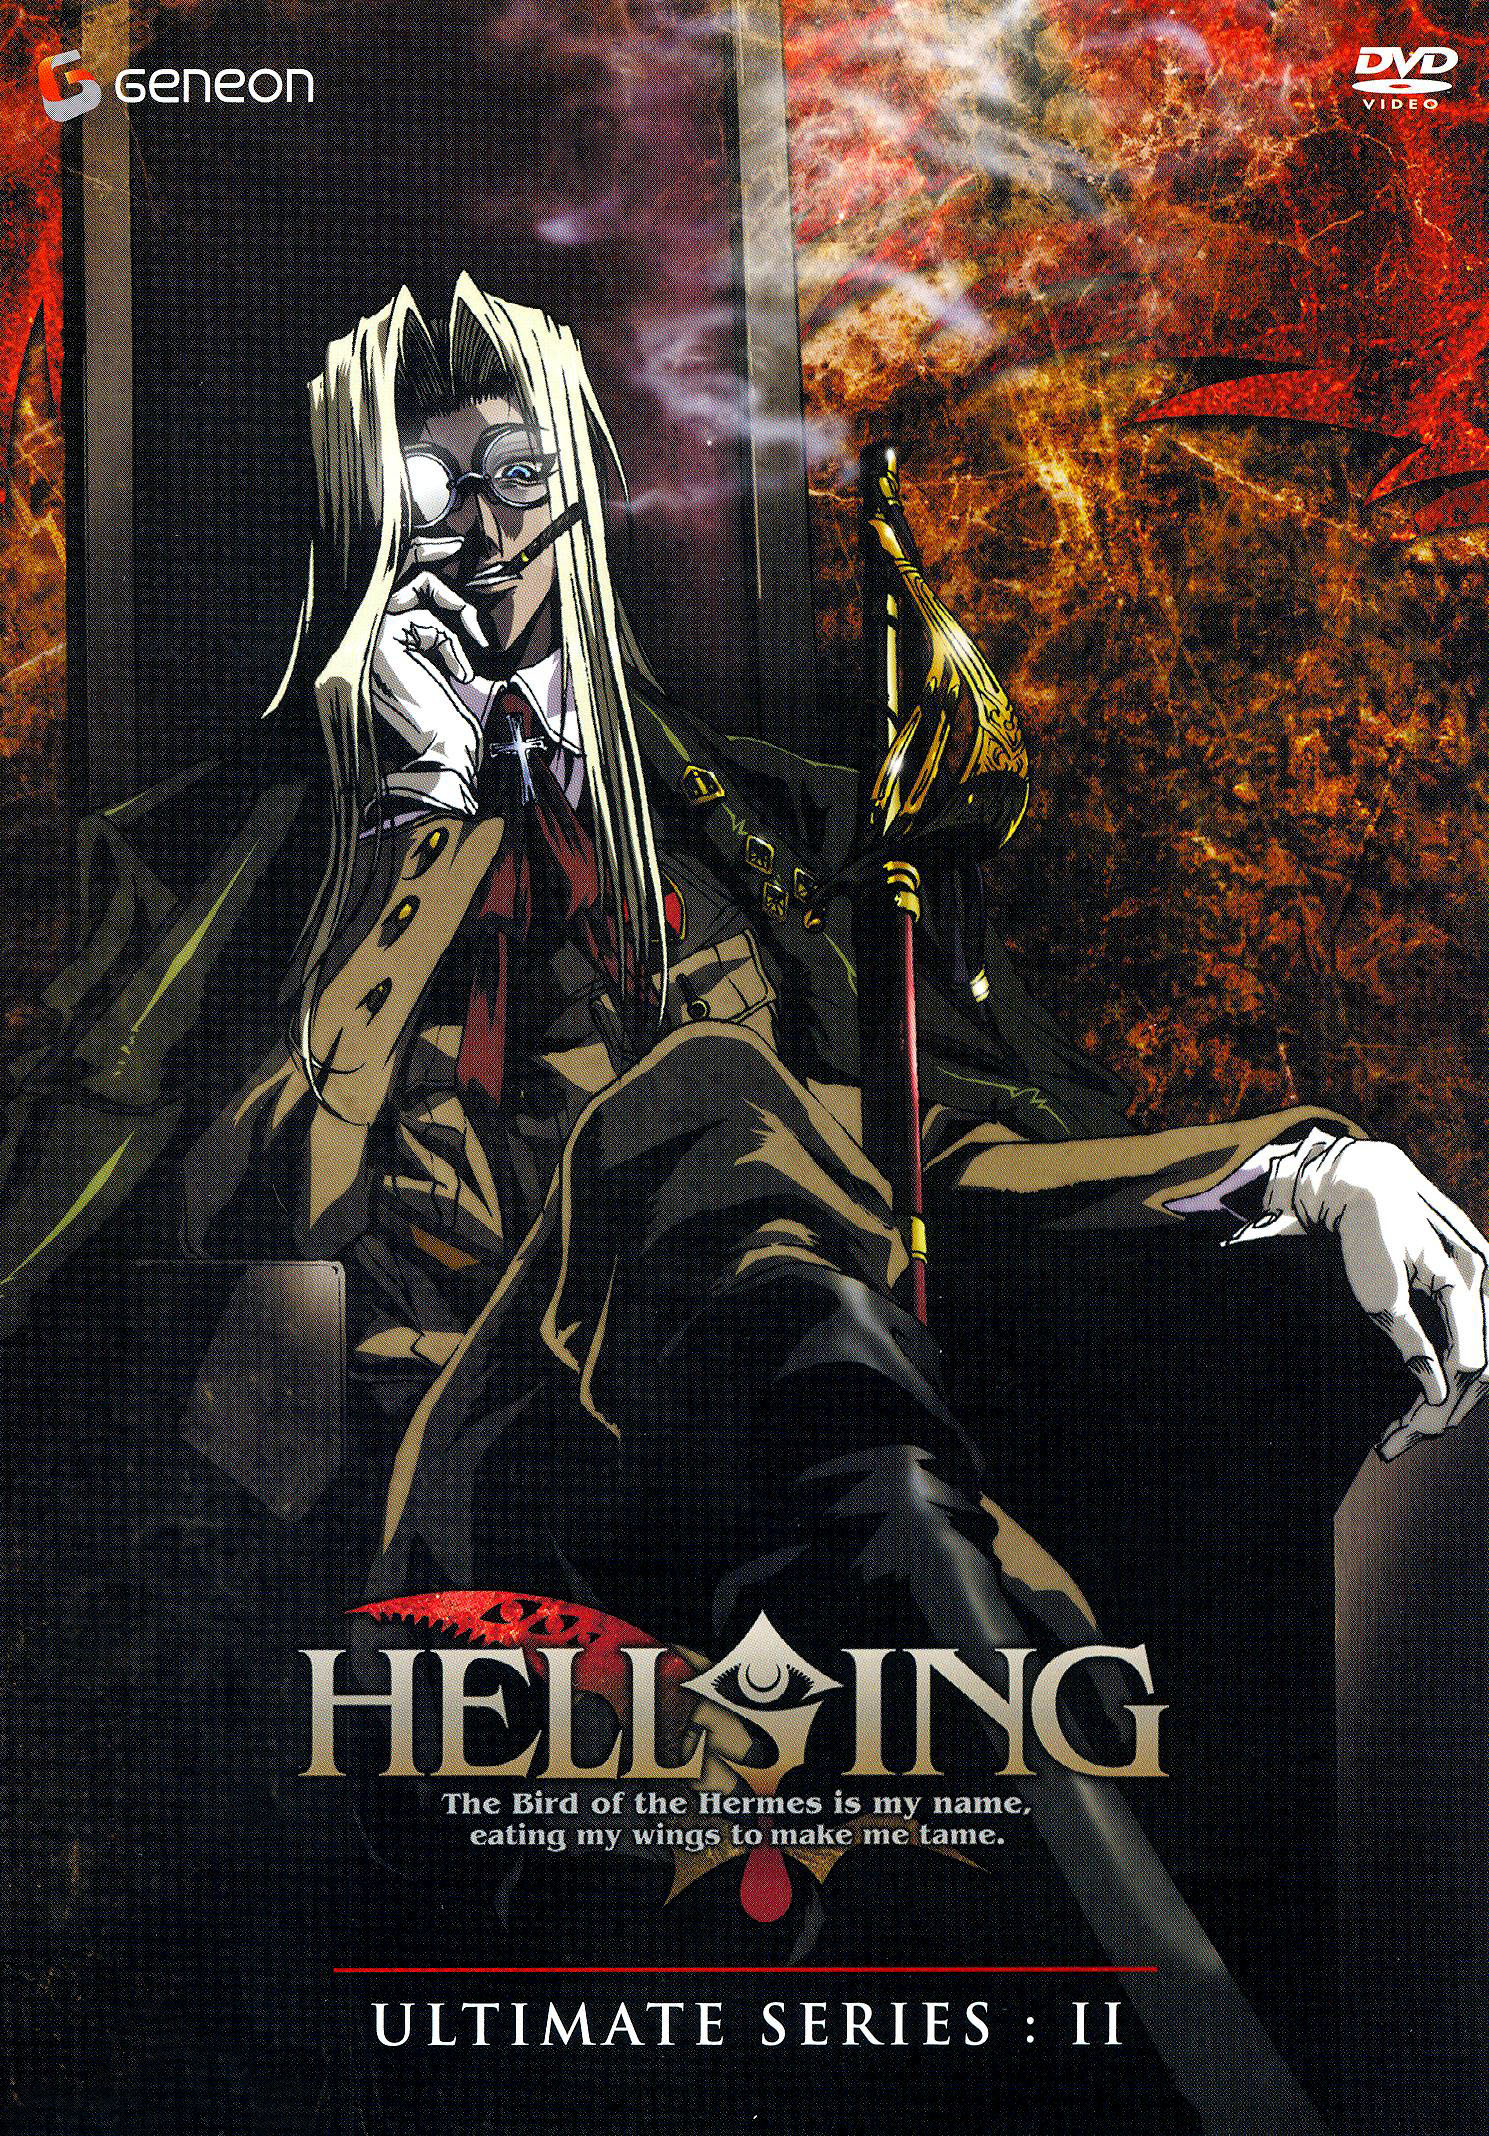 Hellsing - The Complete Original Series Collection [DVD]